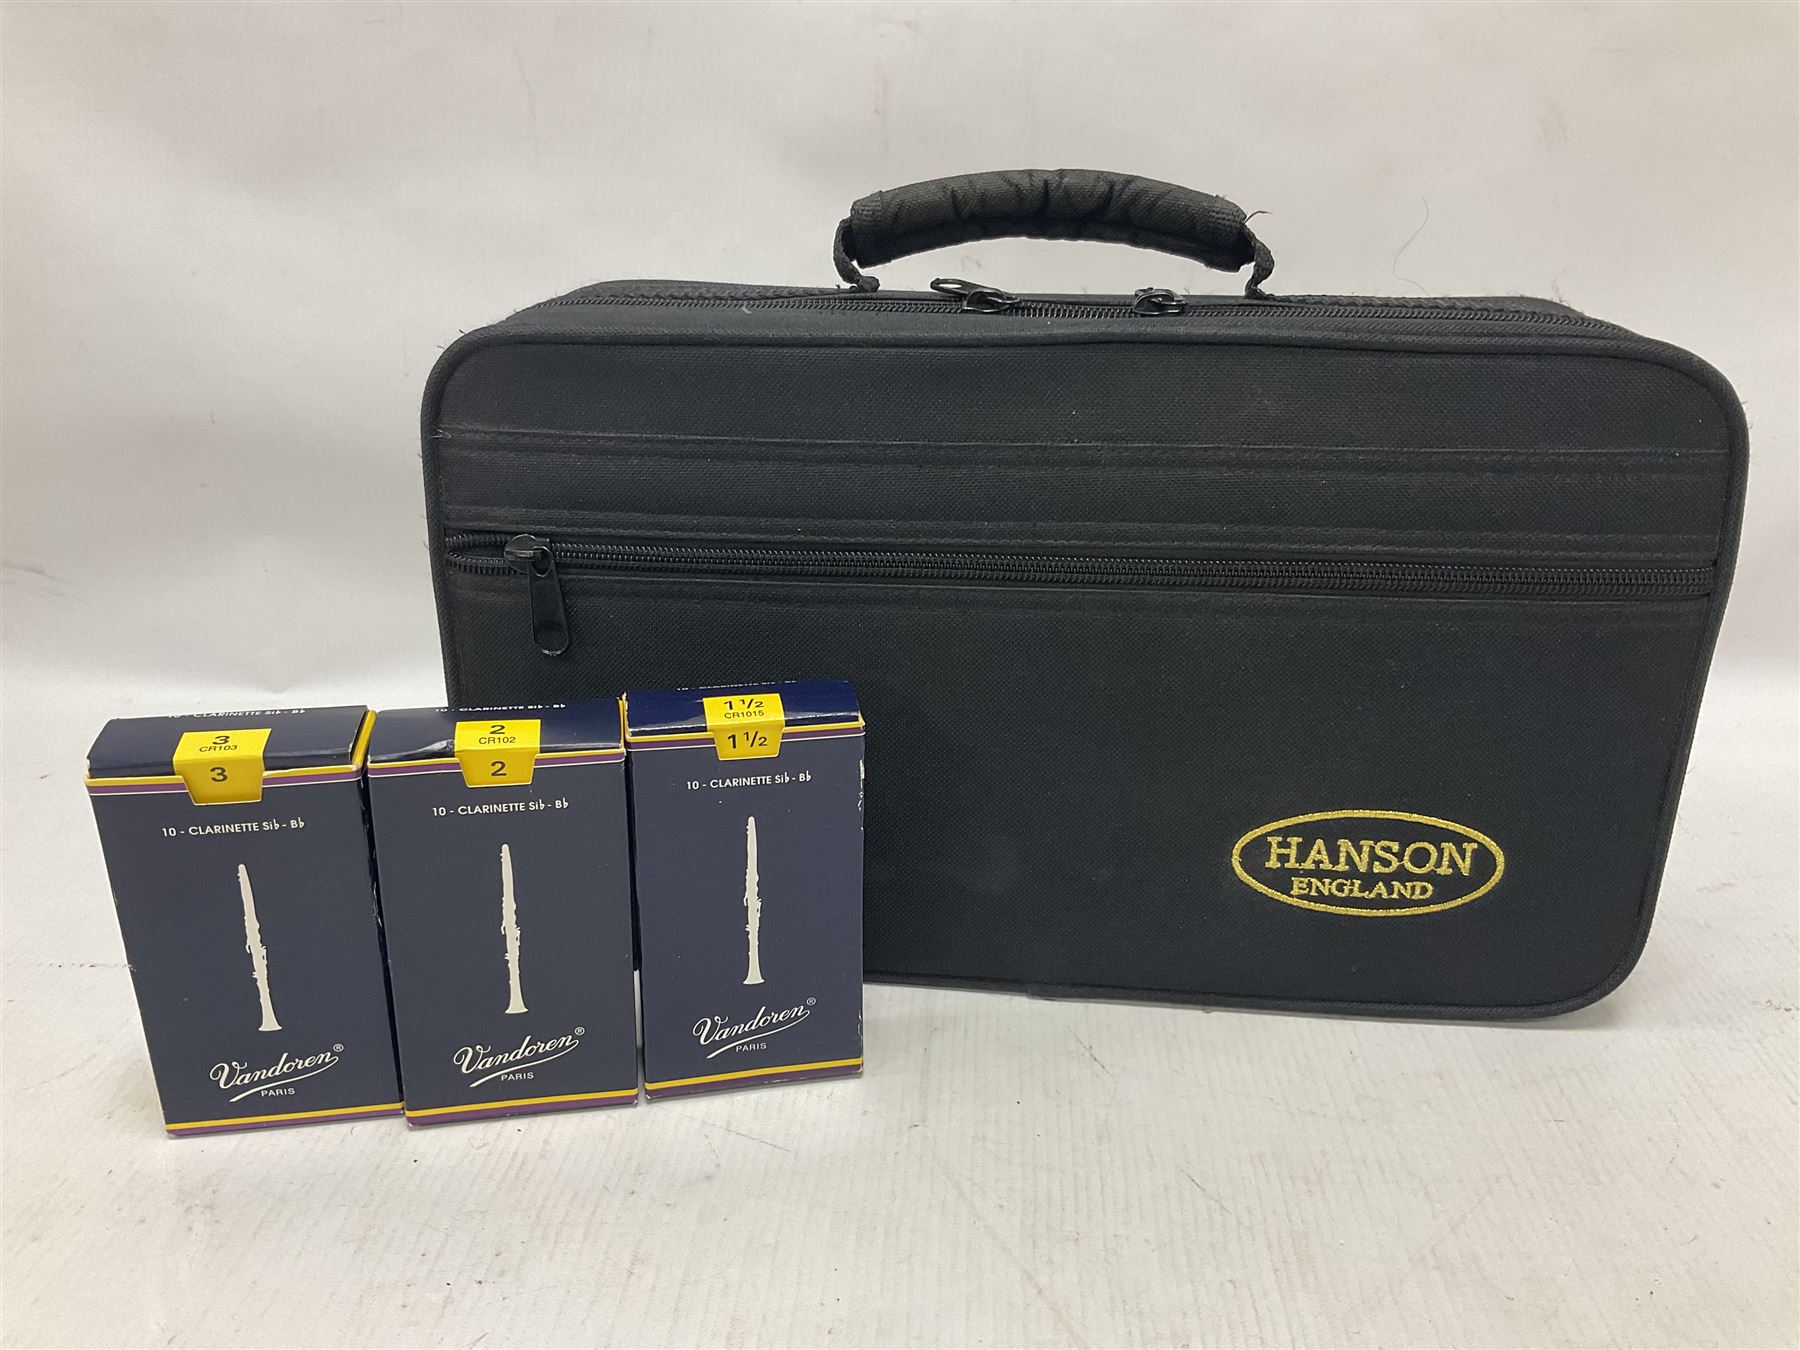 Hanson B Flat clarinet in a fitted case with accessories and three boxes of Vandoren reeds - Image 7 of 21